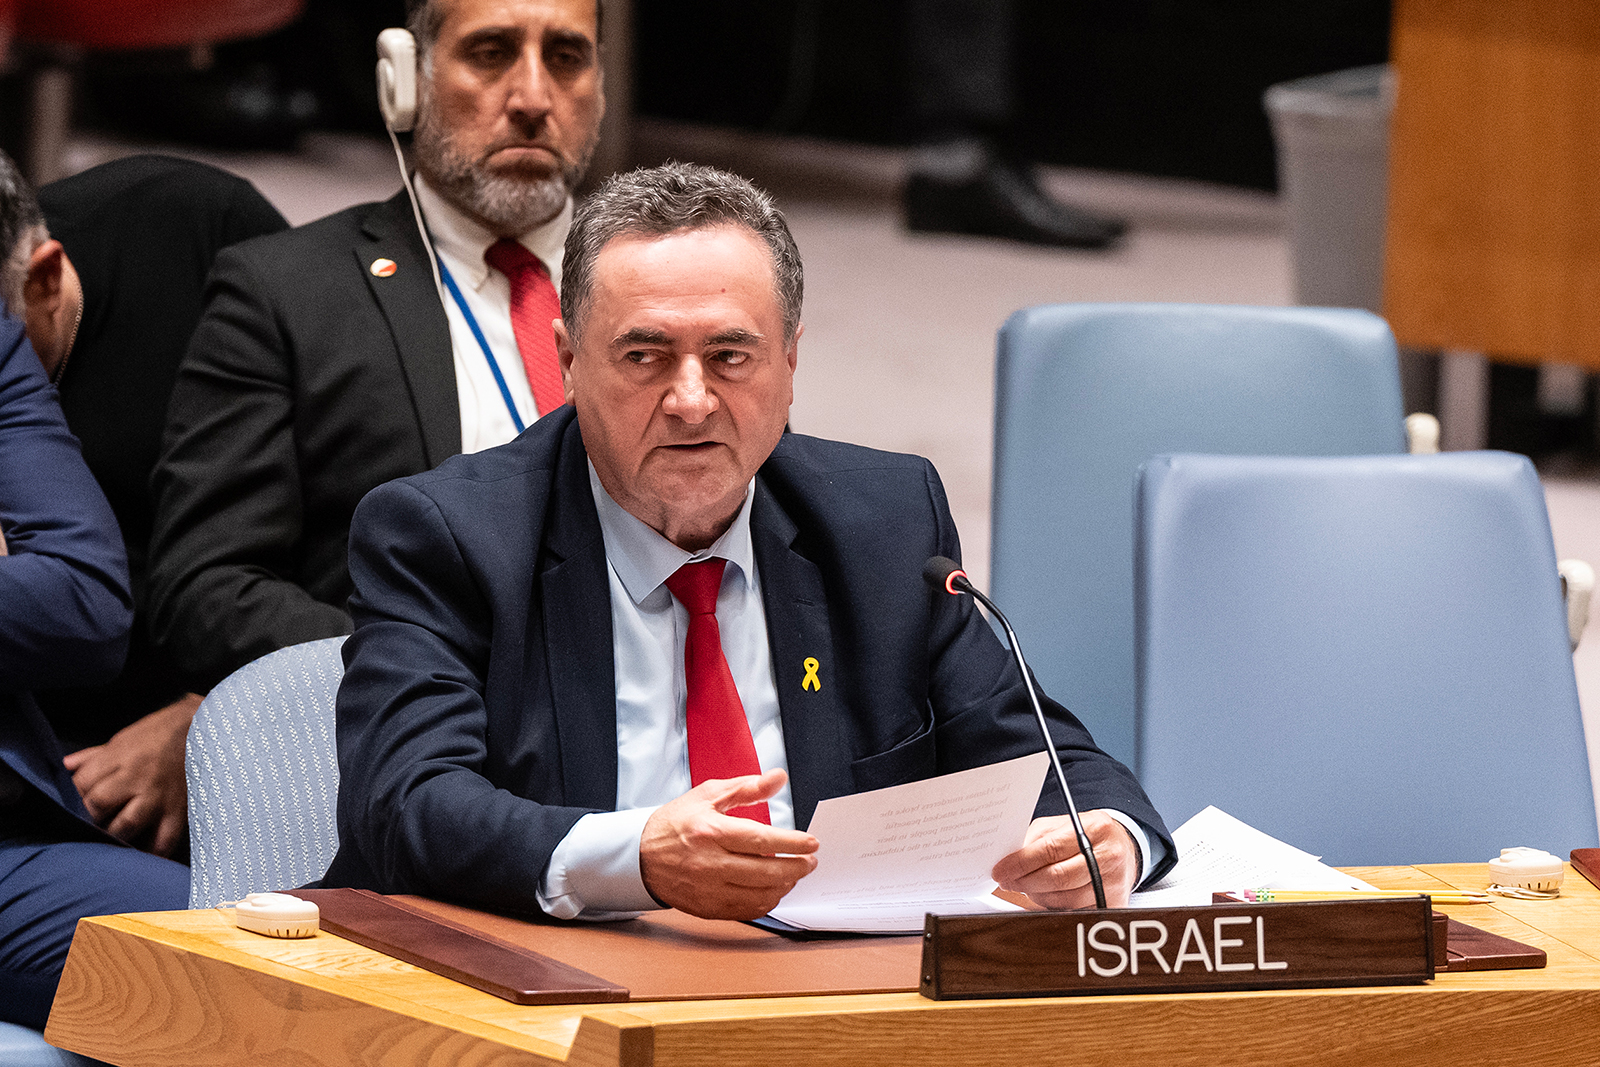 Israel Foreign Minister Israel Katz speaks during a Security Council meeting at UN Headquarters, New York on March 11. 